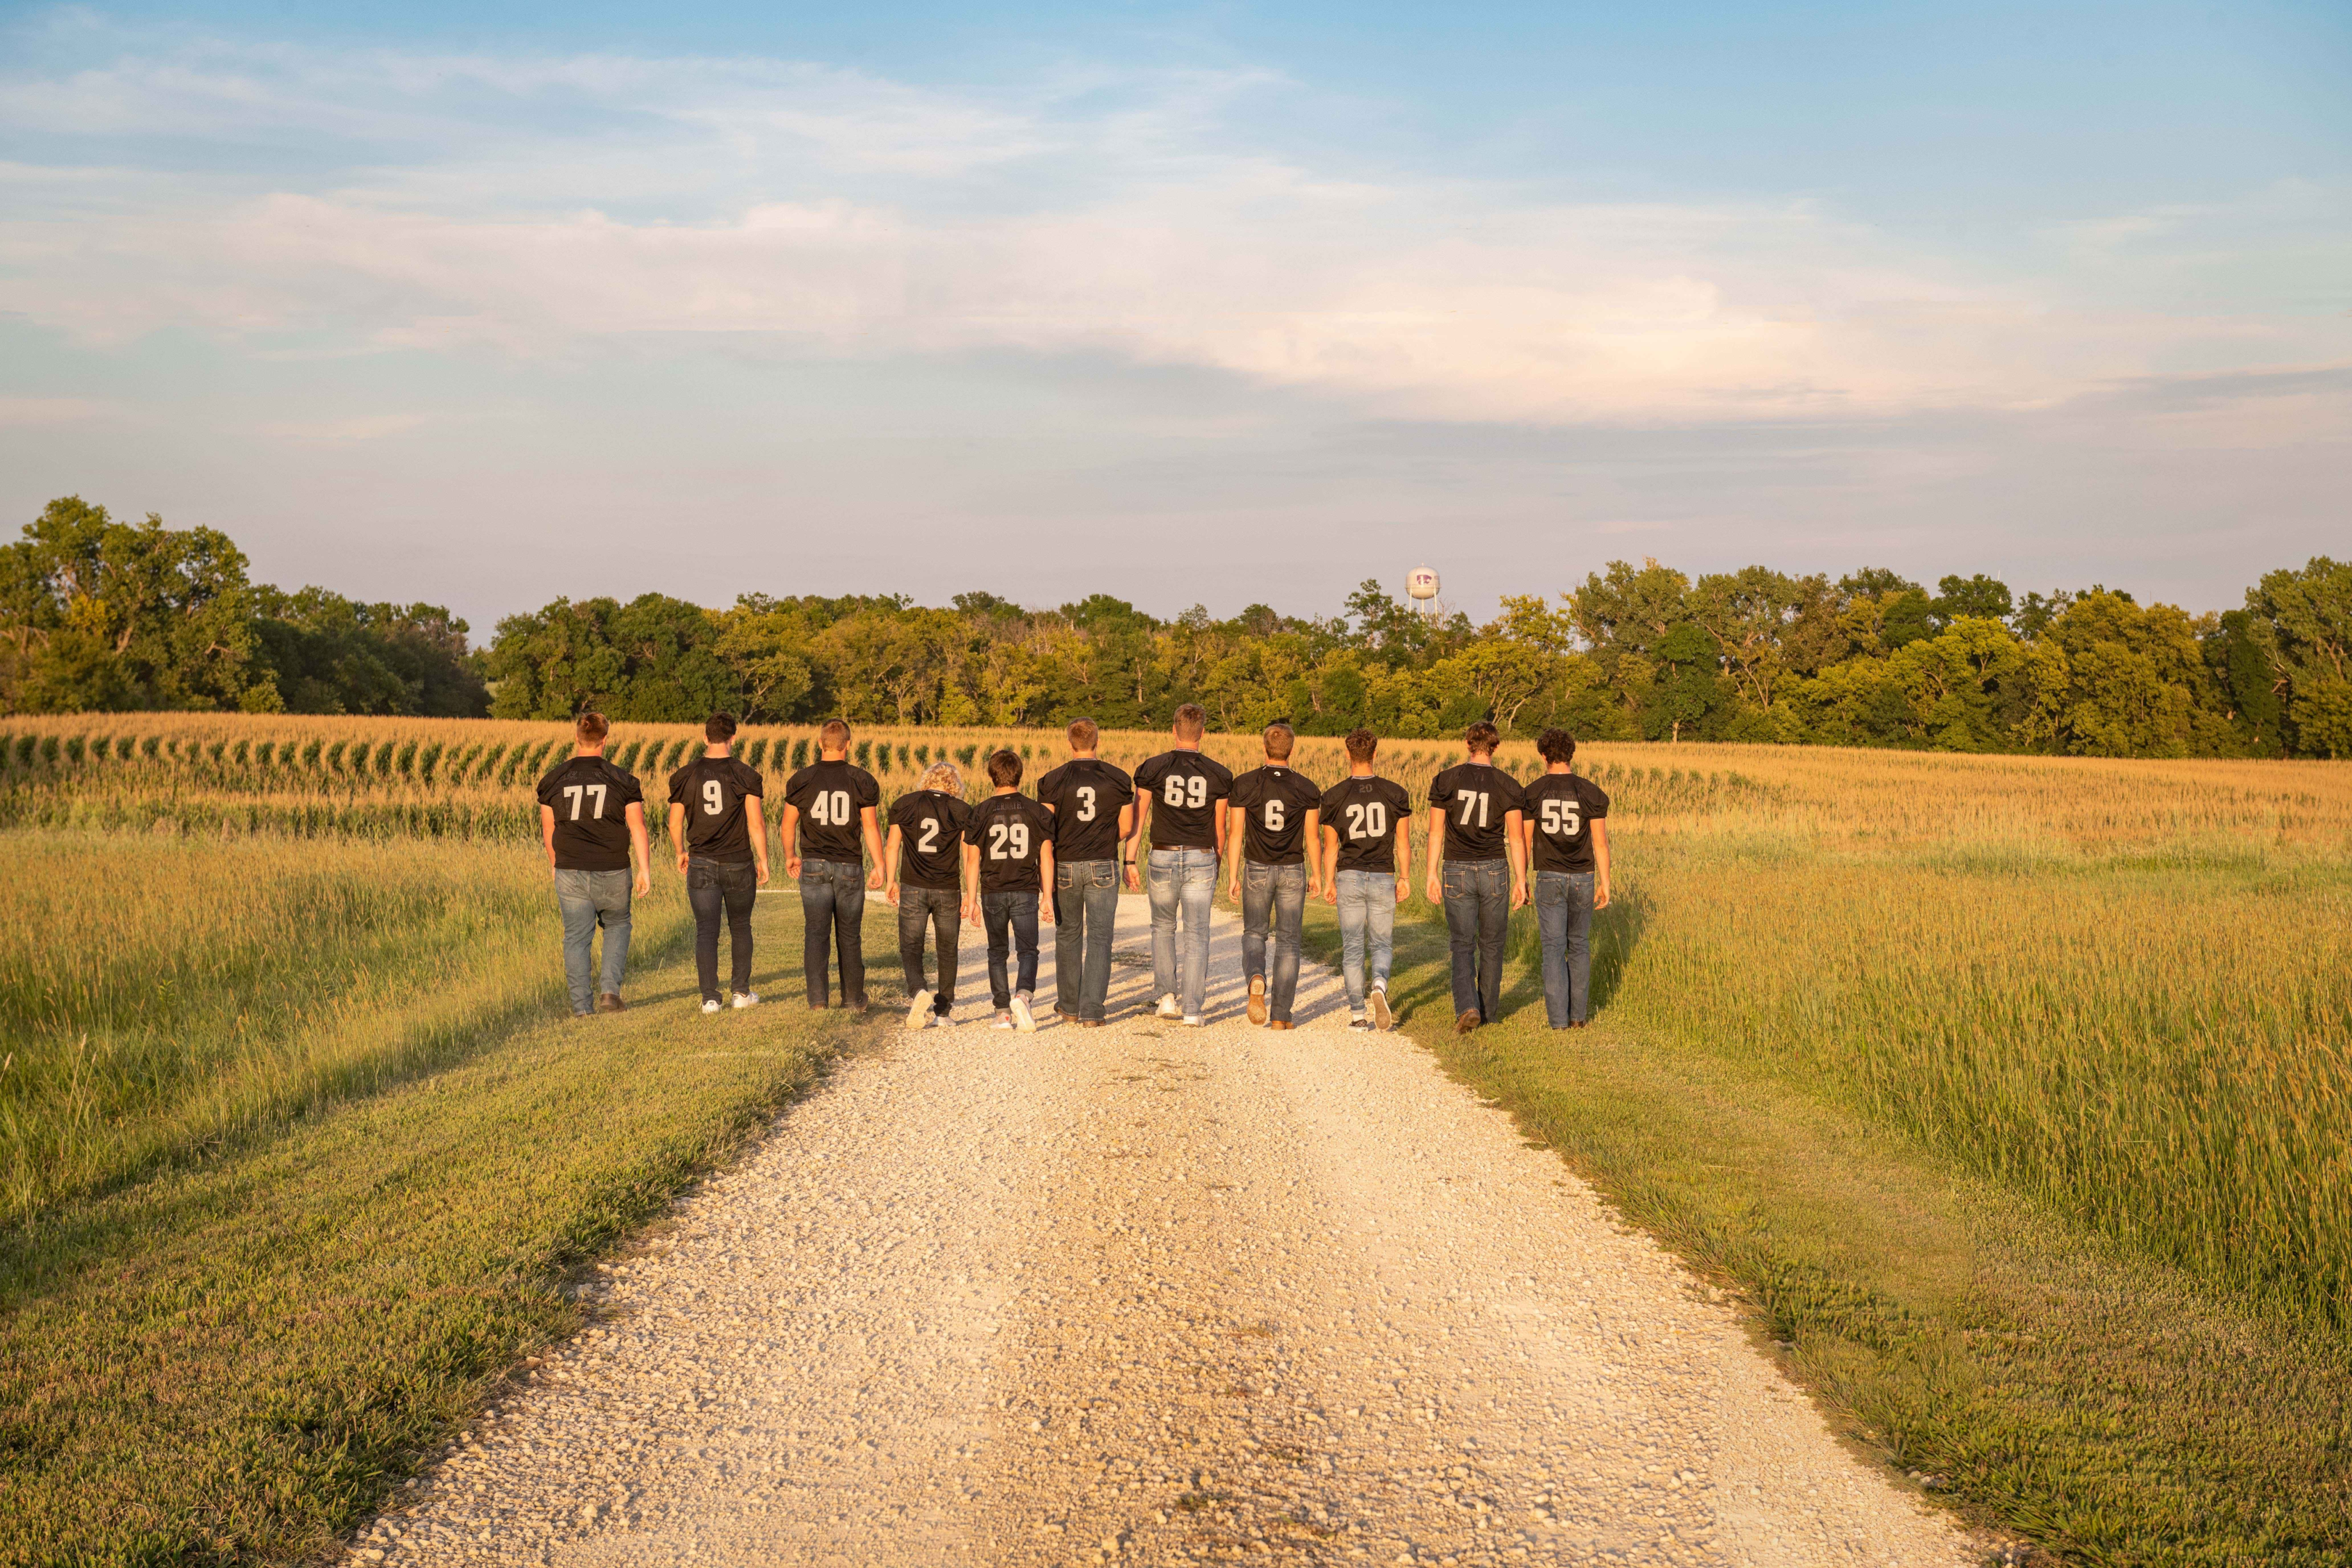 Here's a senior picture idea for the whole team - the seniors walking down the road, away from the camera.